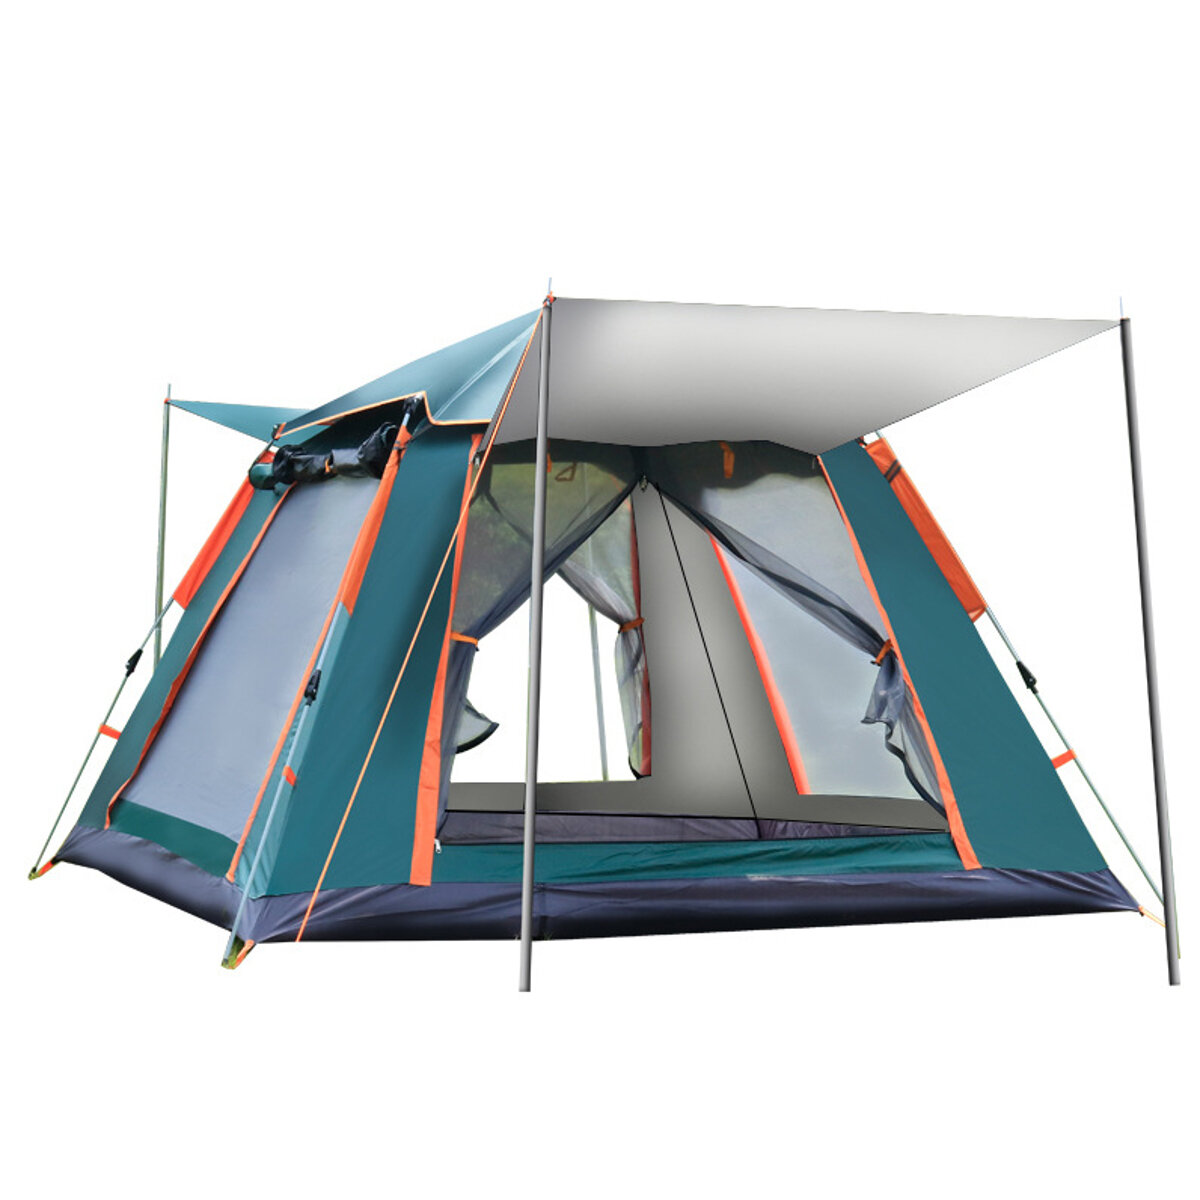 IPRee 6-7 People Fully Automatic Tent Silver Glue Rainproof Windproof Outdoor Camping Family Picnic Travel Tent